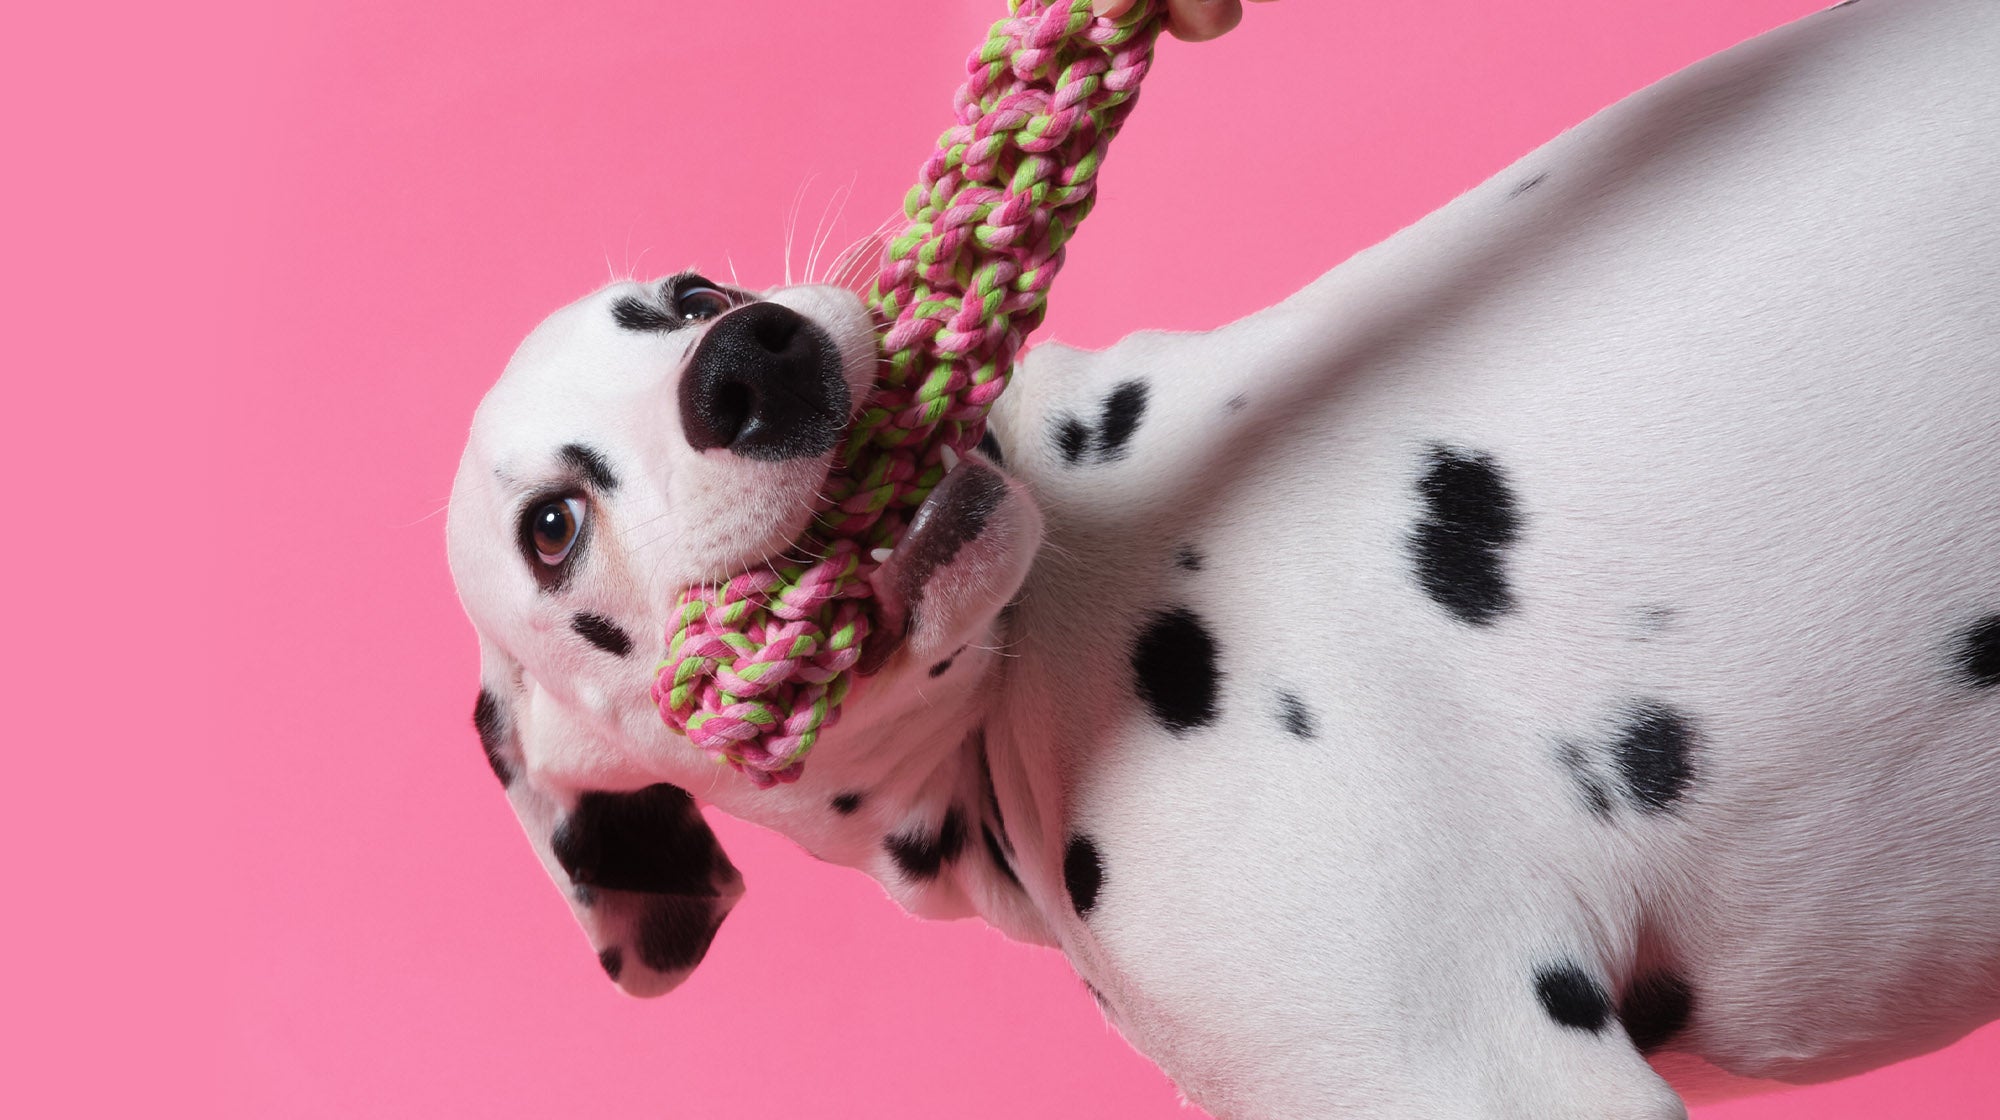 Dalmation dog on pink background with a rope toy in it's mouth